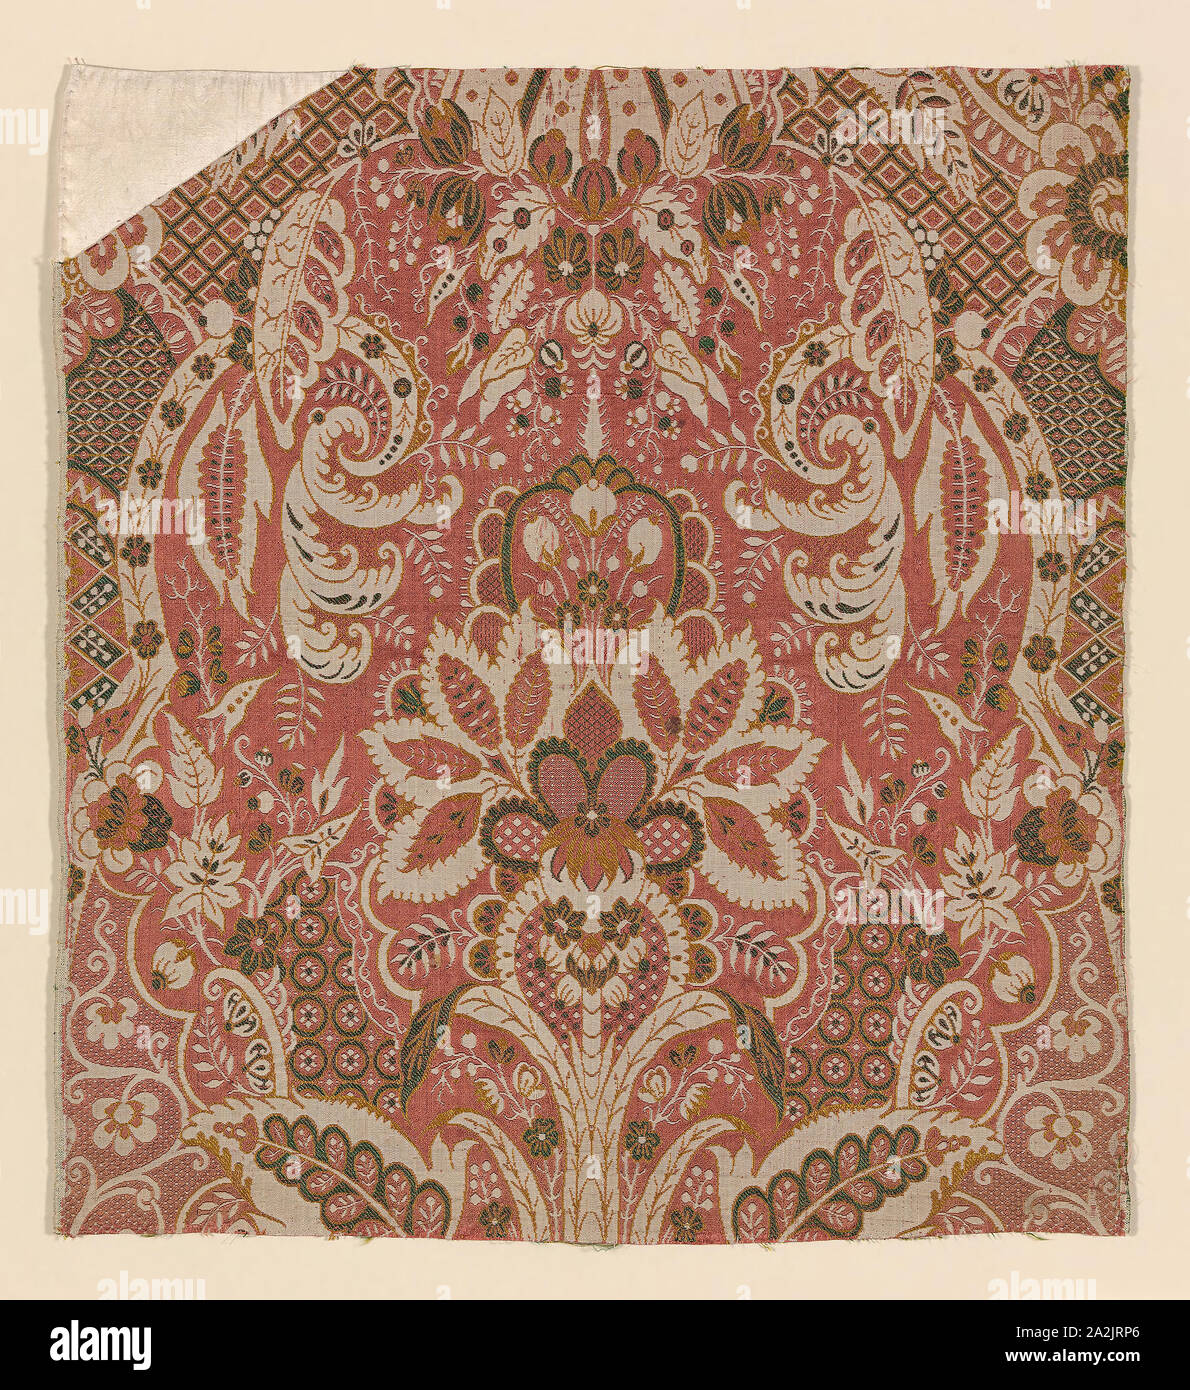 Fragment, 1722/27, France, Silk, warp-float faced 7:1 satin weave with supplemenatry patterning wefts bound in 3:1 twill interlacings and self-patterning ground wefts tied by supplementary binding warps in plain interlacing, 55.8 × 51.1 cm (22 × 20 1/8 in Stock Photo